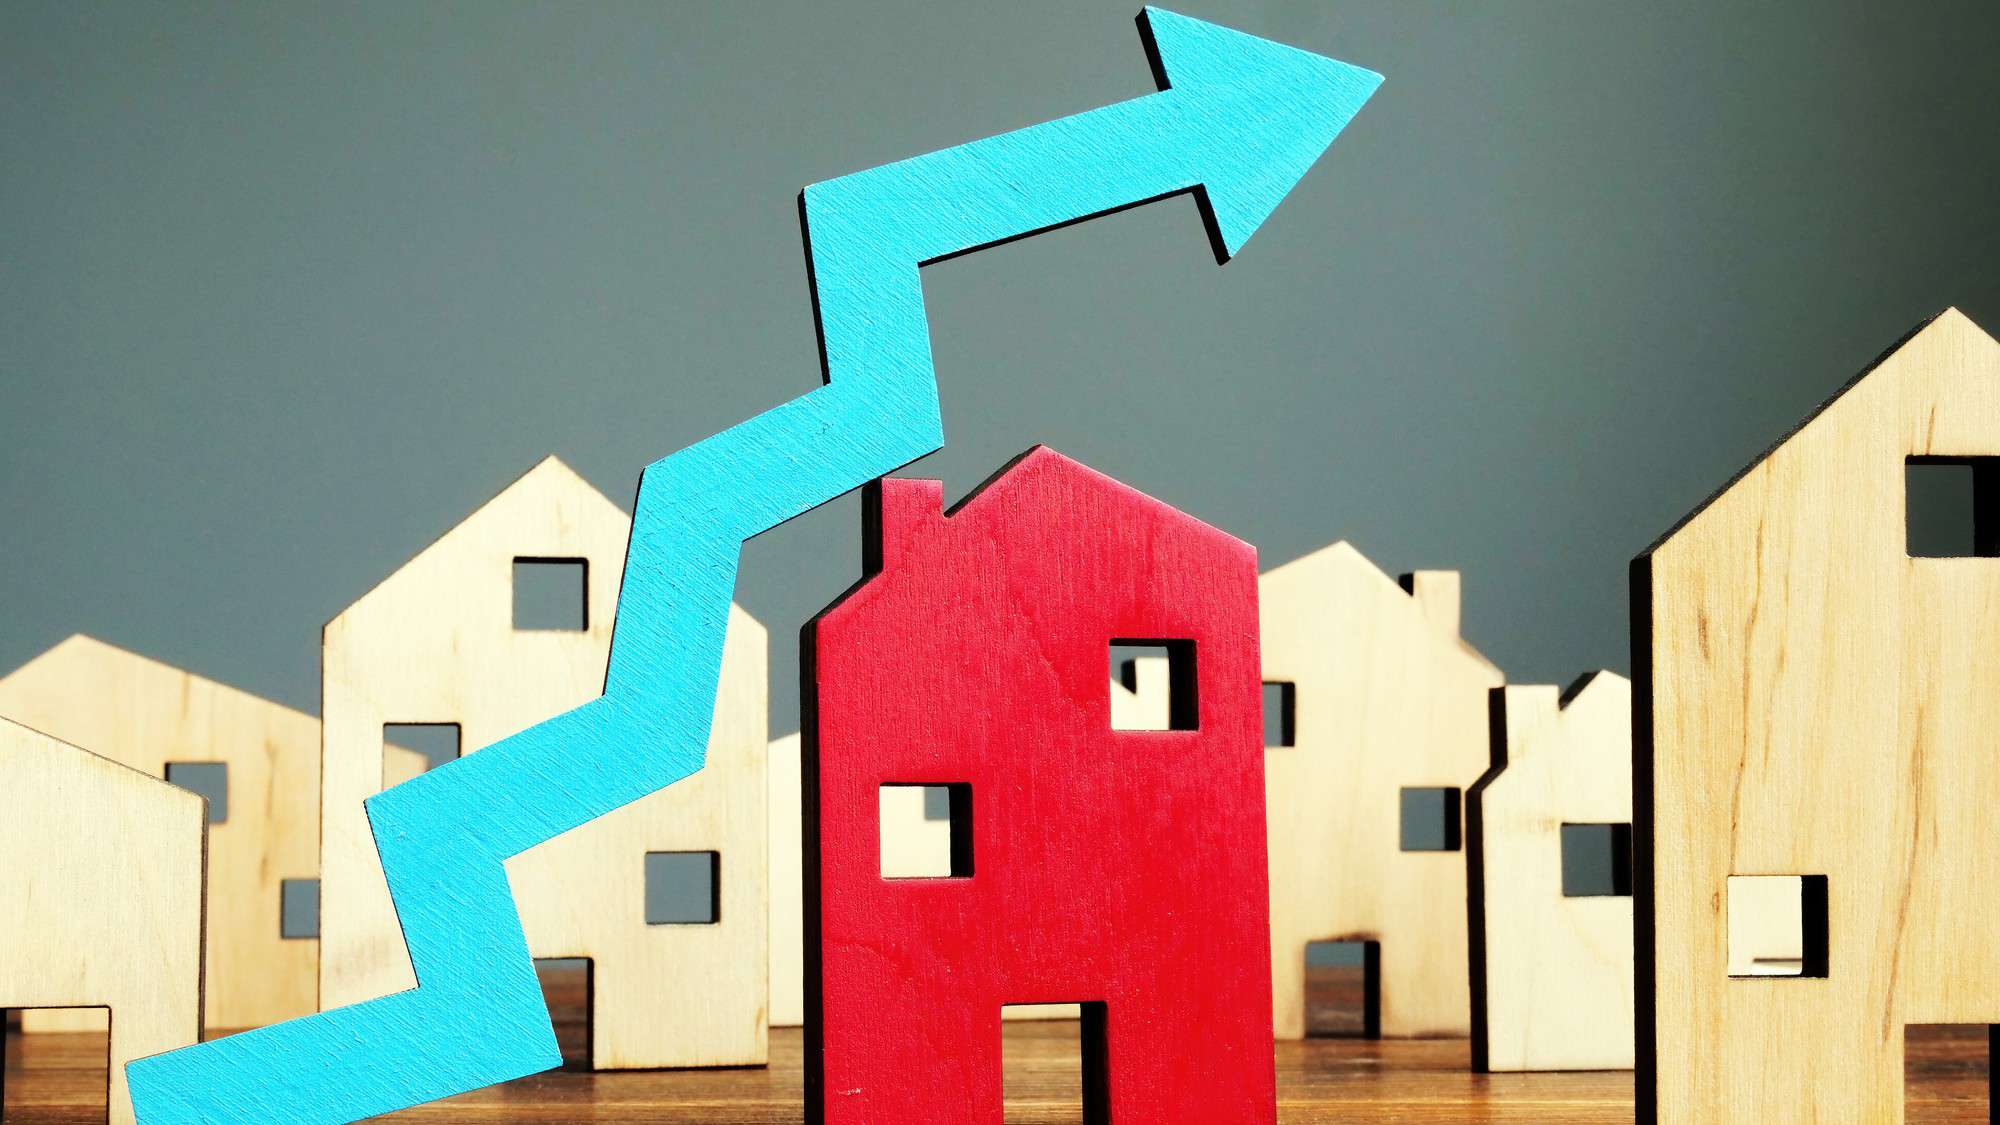 Increasing blue arrow with wooden property houses representing a rising share price.